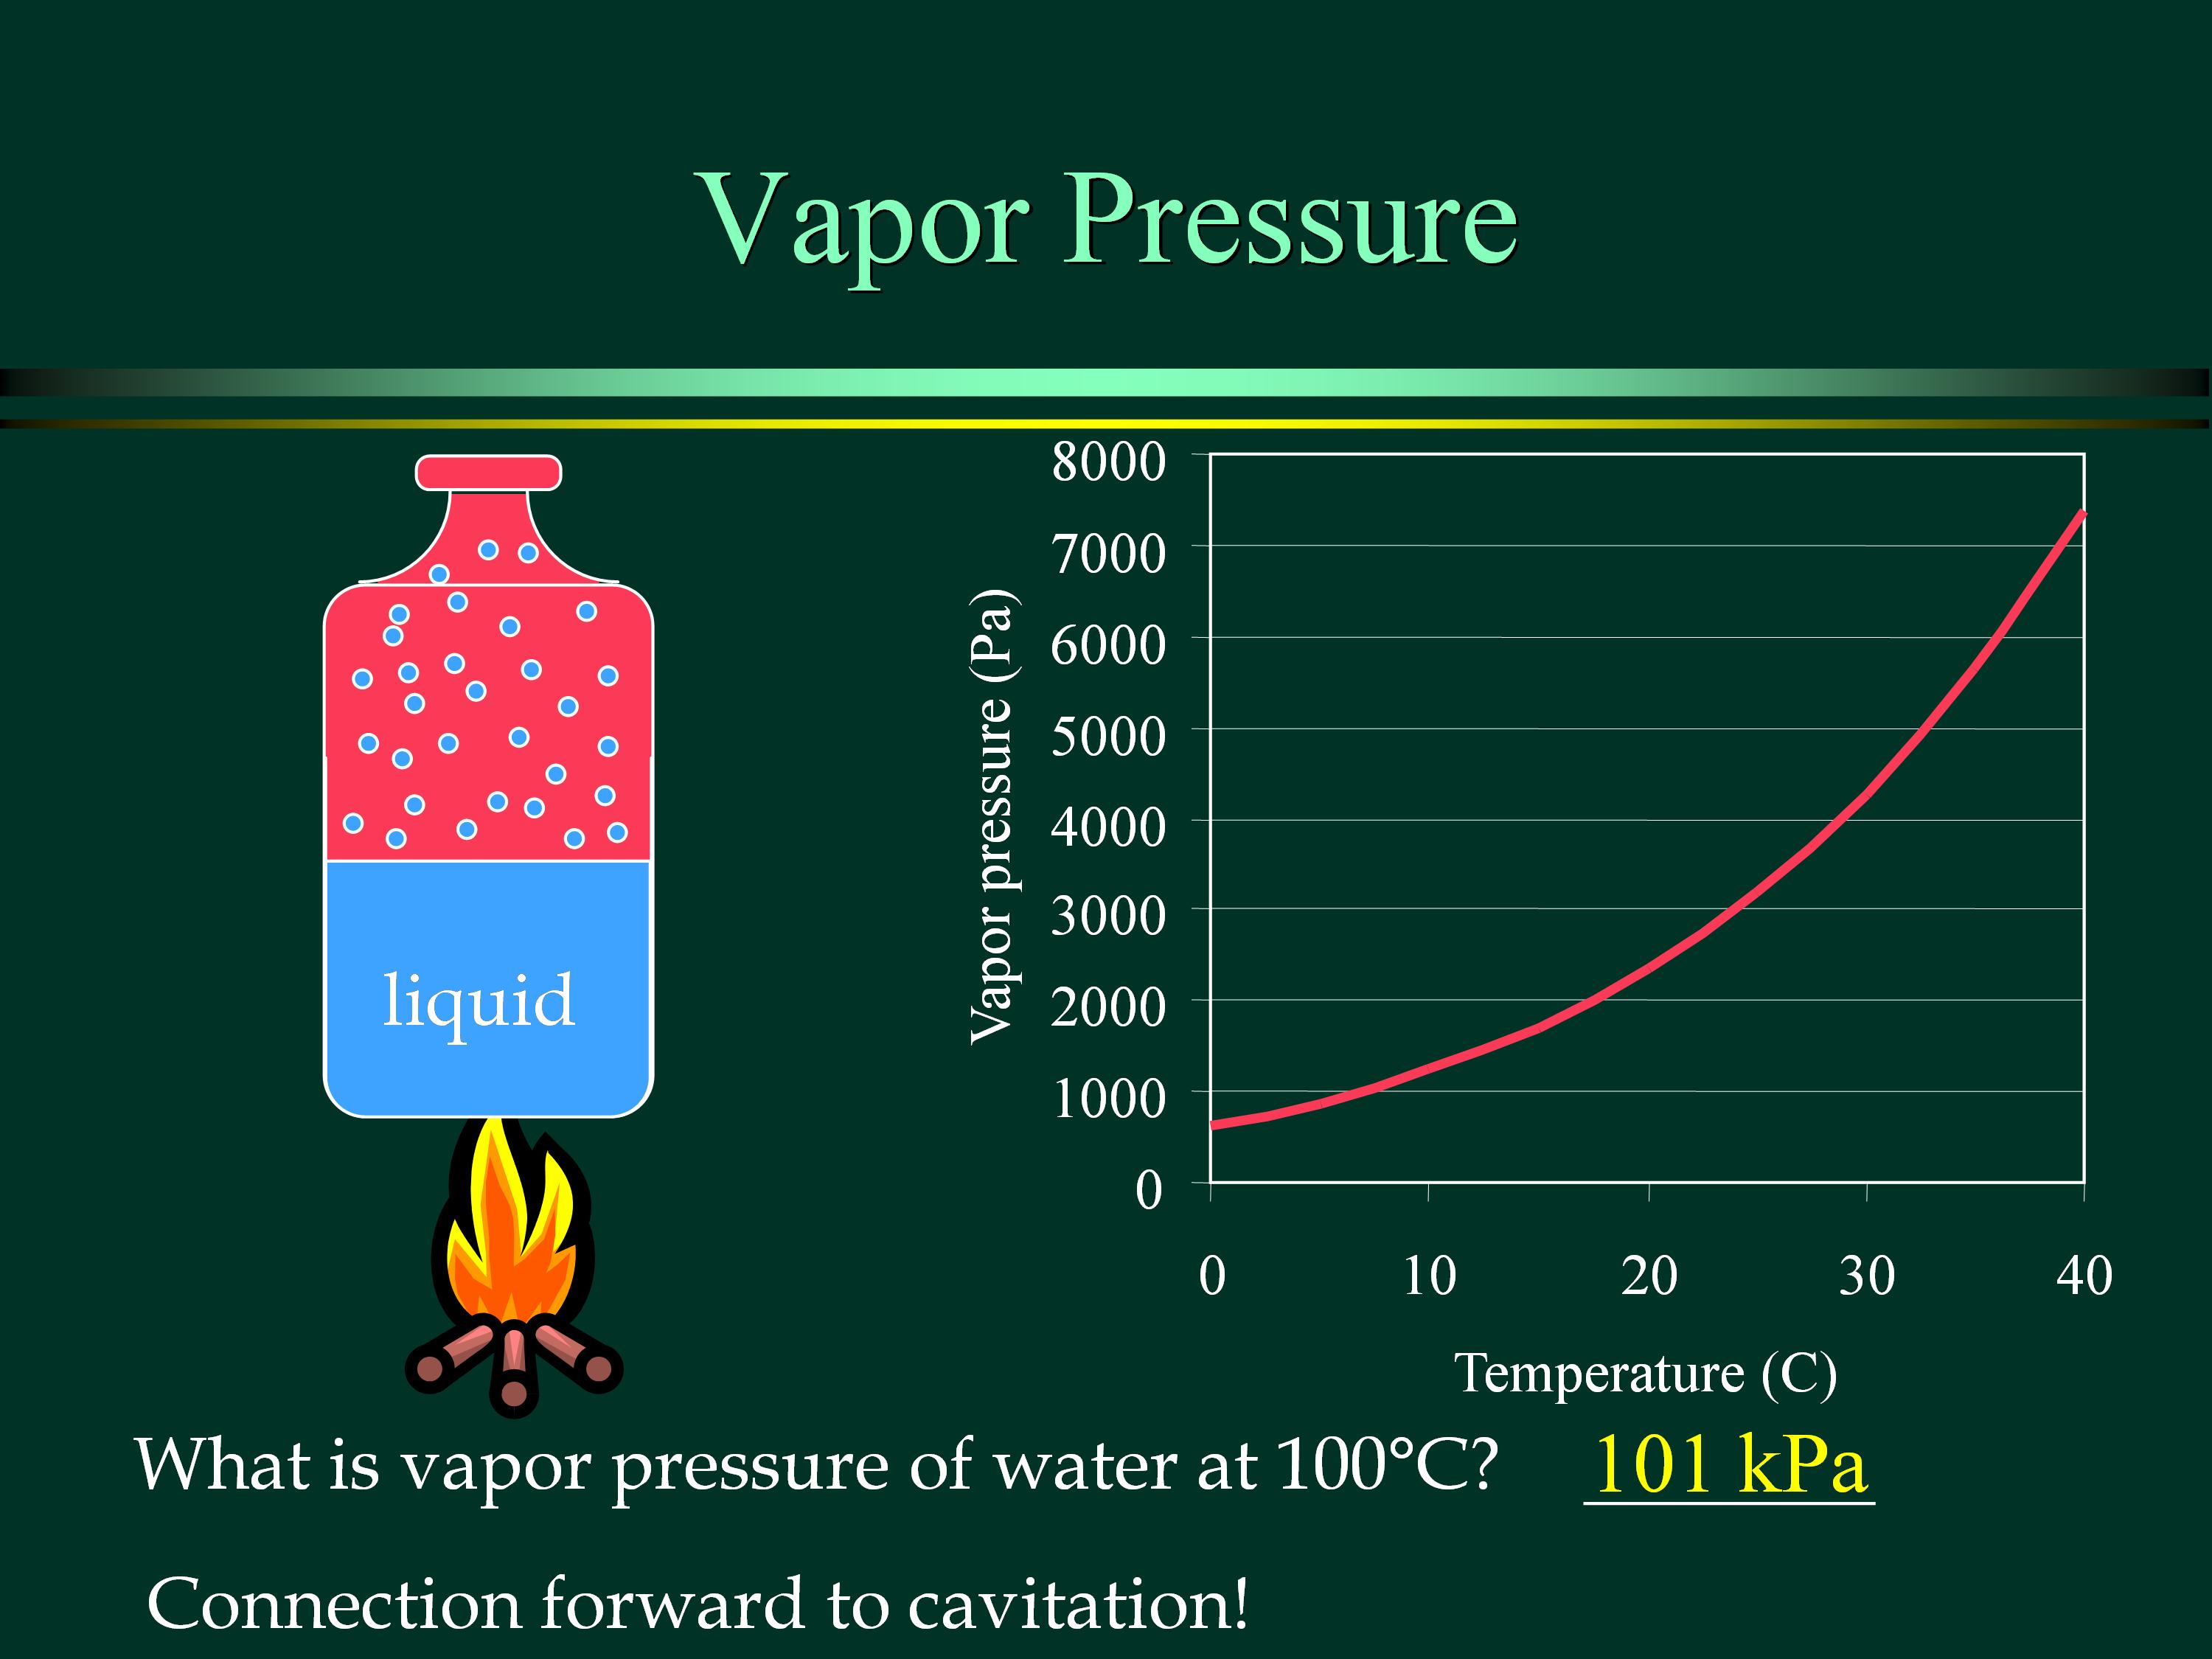 3.9 Vapour Pressure and Cavitation